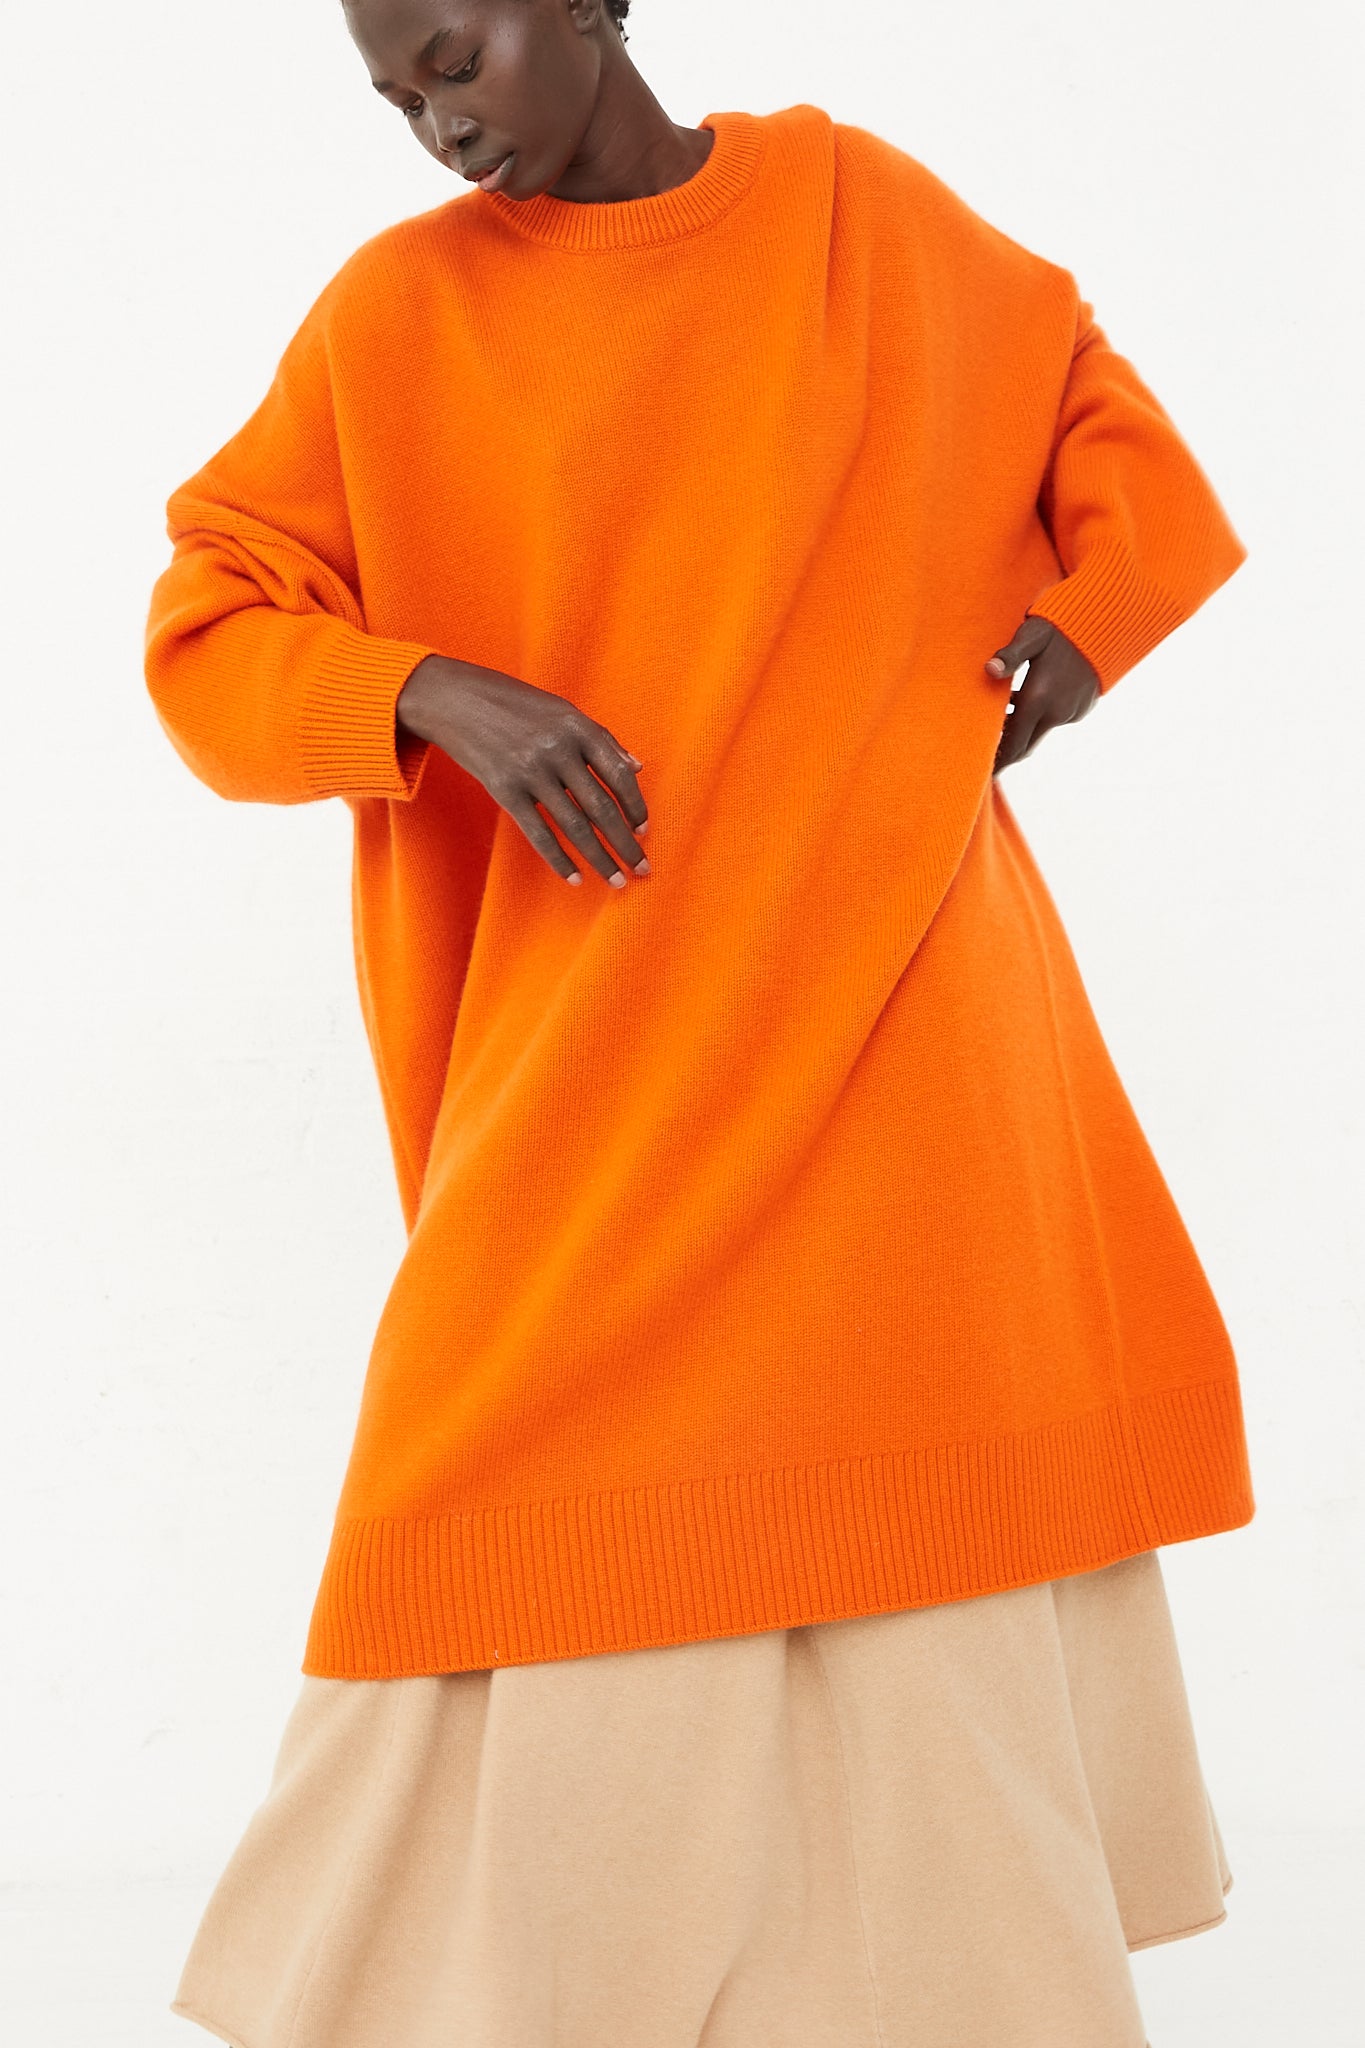 An Extreme Cashmere No. 303 Sandra Dress in Maple sweater dress.